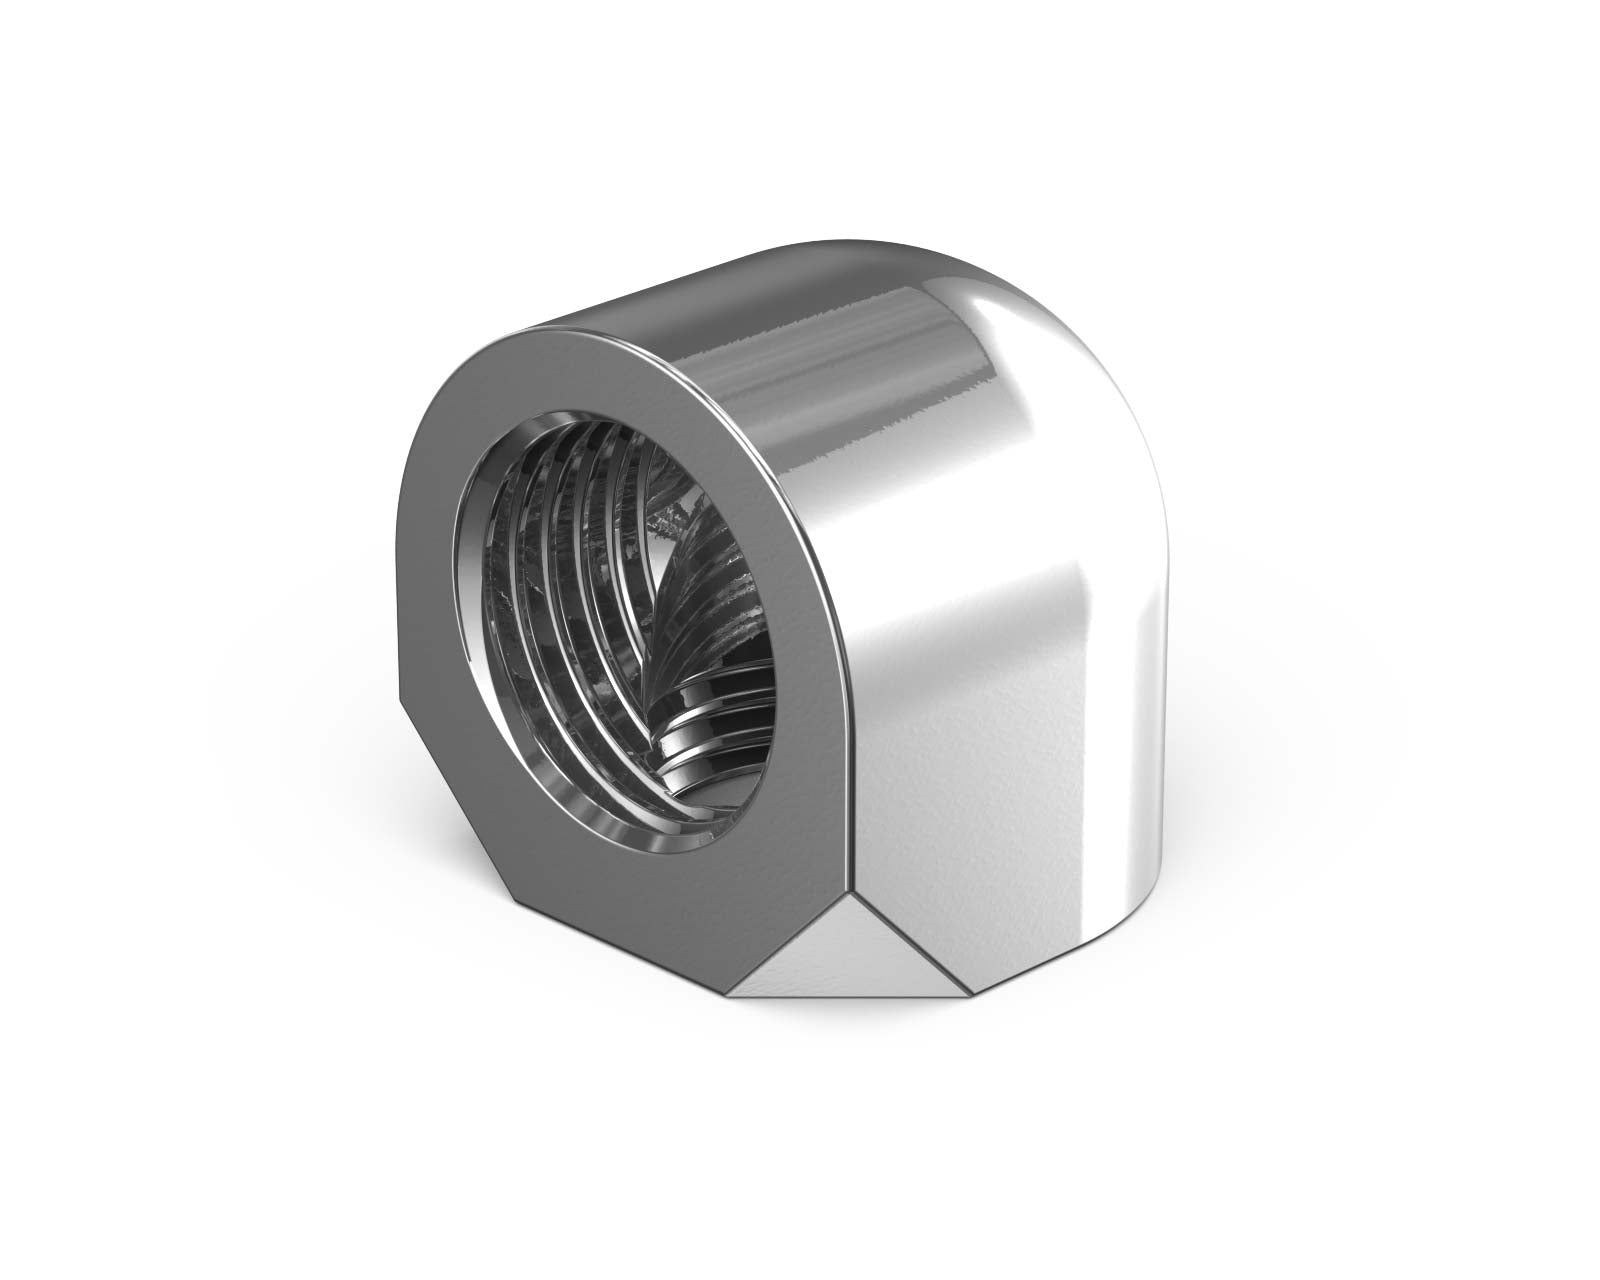 PrimoChill Female to Female G 1/4in. 90 Degree SX Elbow Fitting - PrimoChill - KEEPING IT COOL Silver Nickel